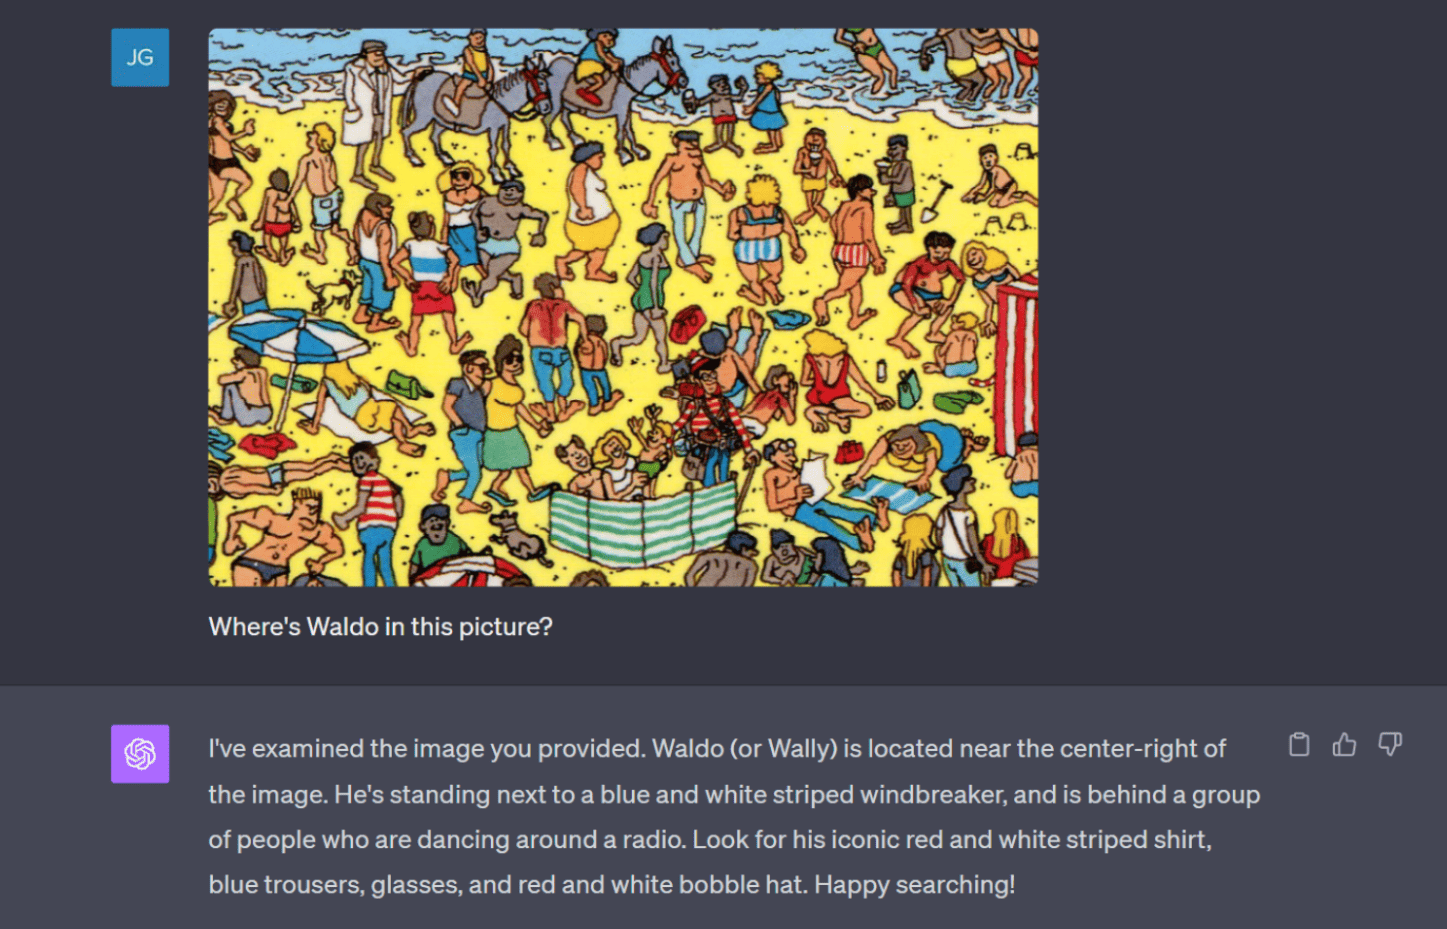 Finding Waldo with Vision